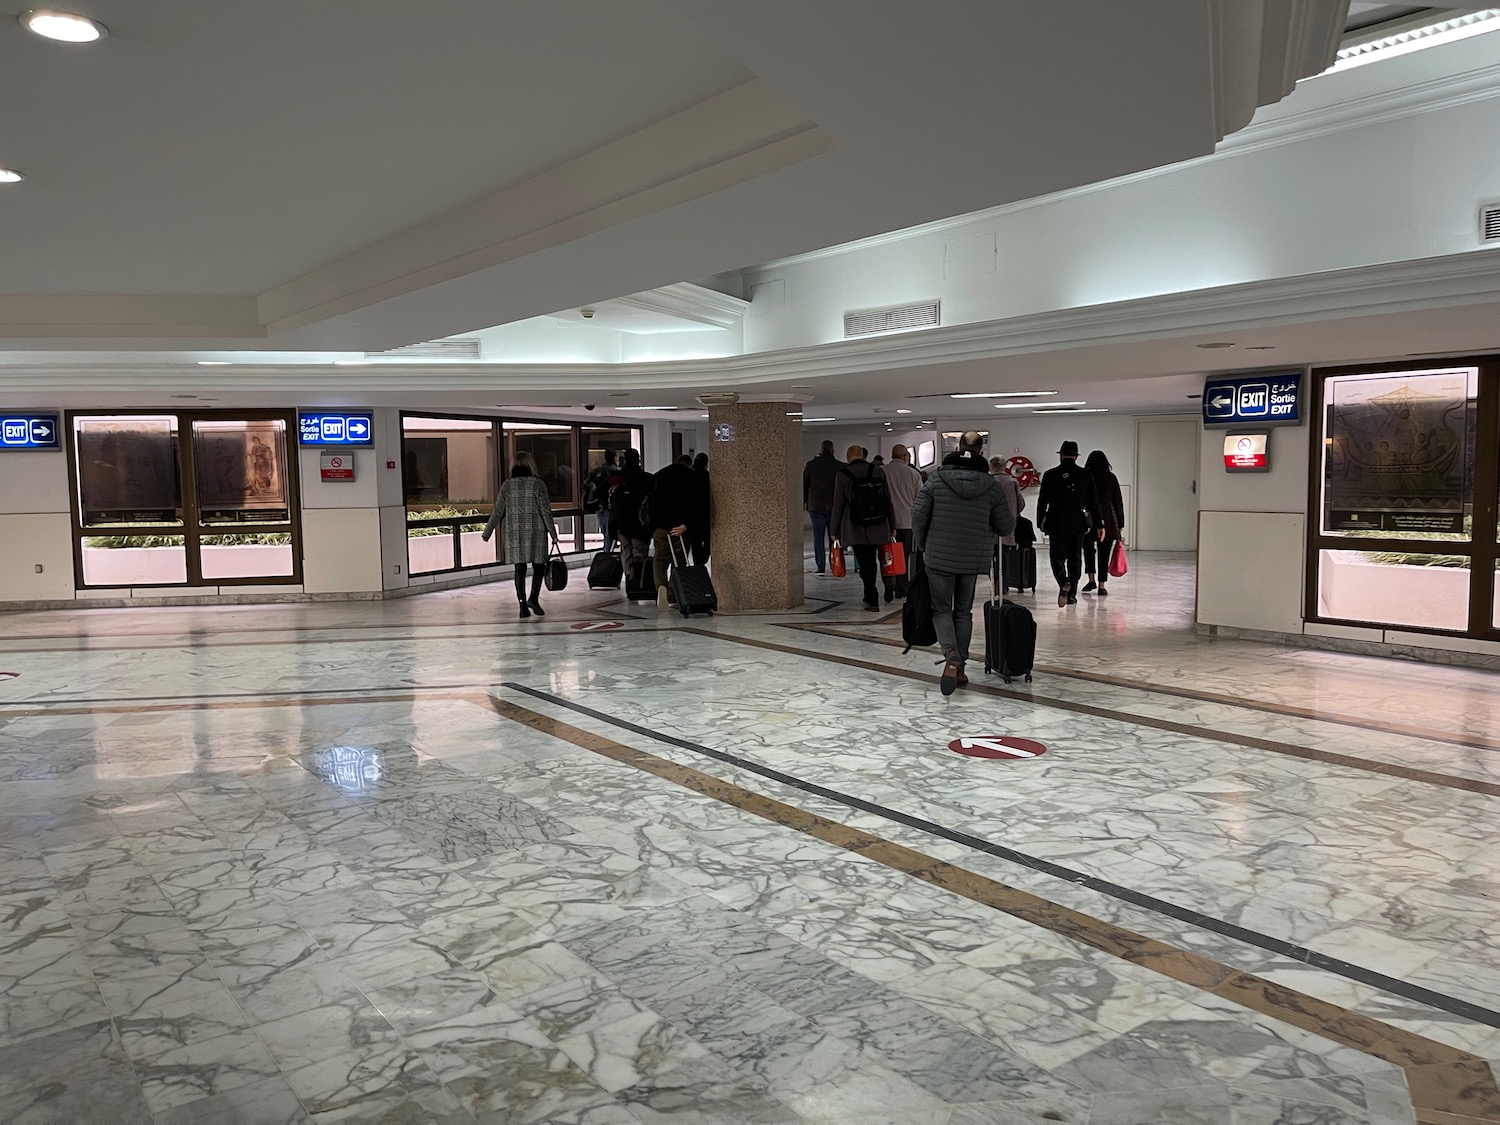 a group of people walking in a large room with marble floor